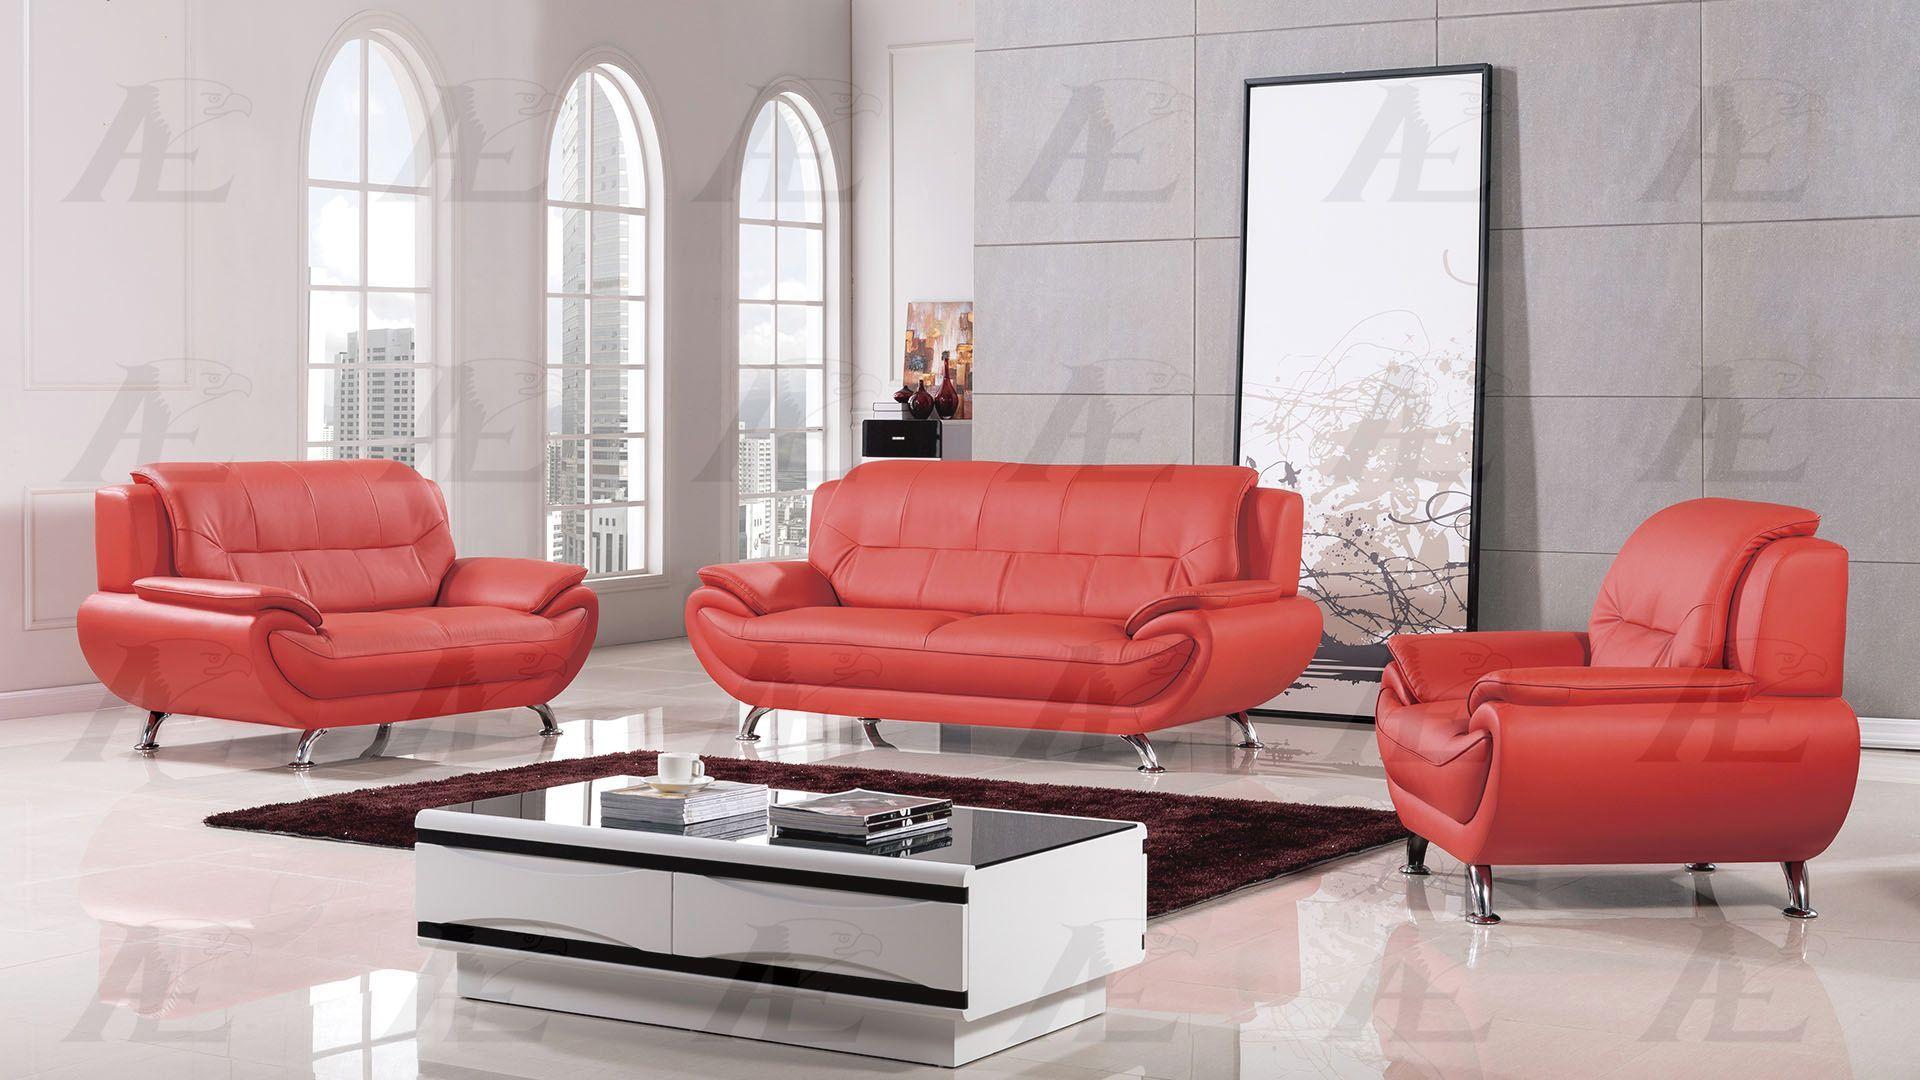 Contemporary, Modern Sofa Set AE208-RED-3PC AE208-RED-3PC in Red Faux Leather